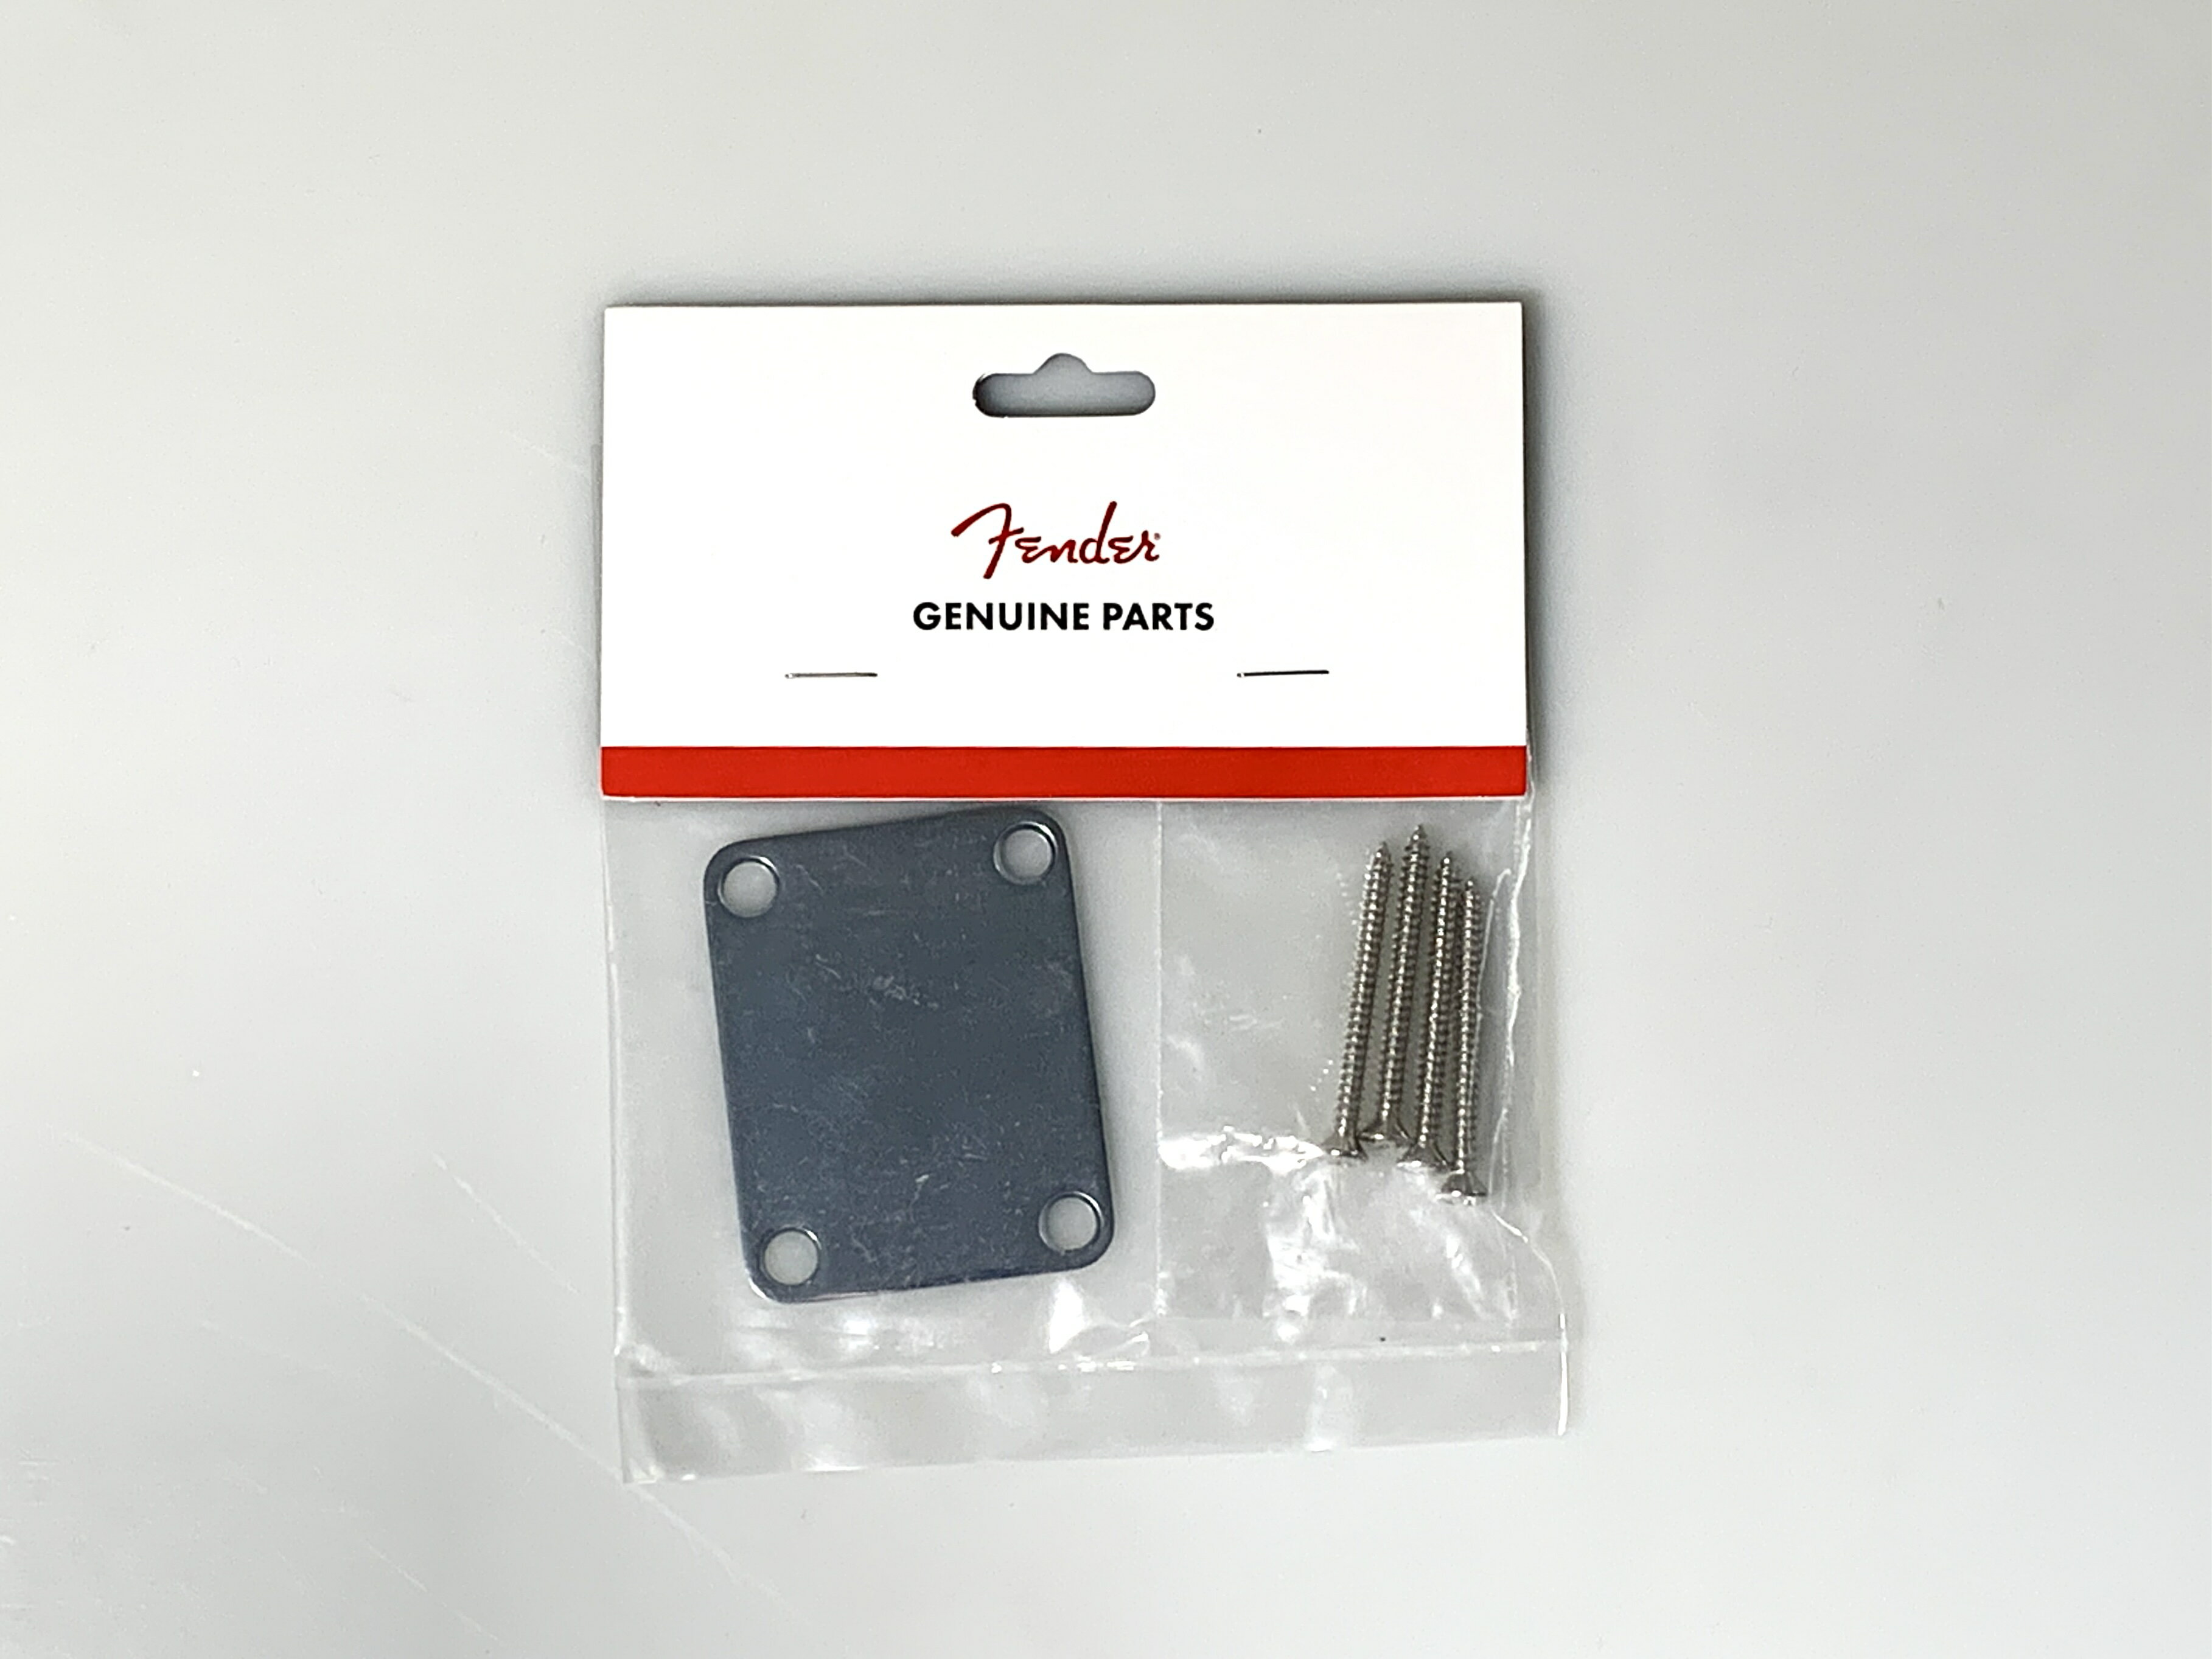 【NEW】Fender Four Bolt Neck Plate, Plain Chrome with 4 Philips Head Screws 991447100【横浜店】 【フェンダー】【パーツ】【ネックプレート】